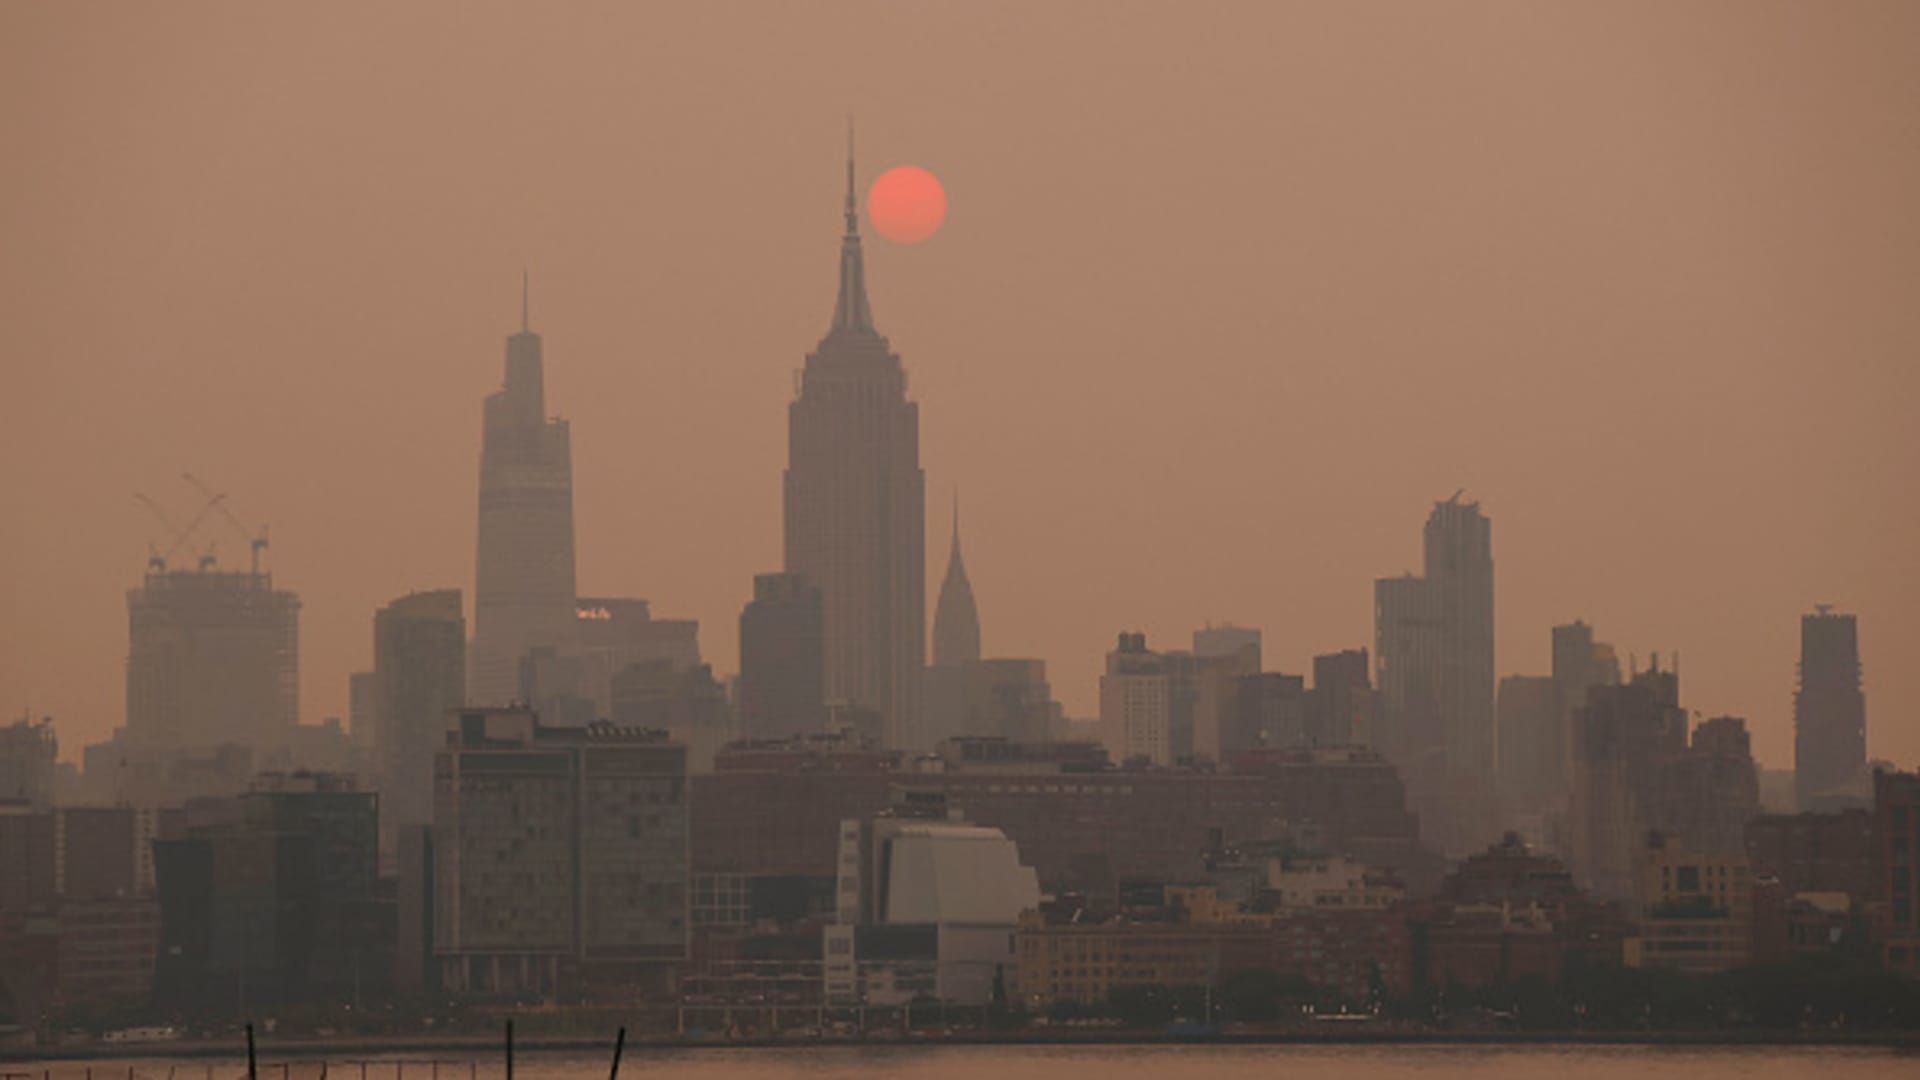 Canadian wildfire smoke creates hazy skies and unhealthy air quality in New York City